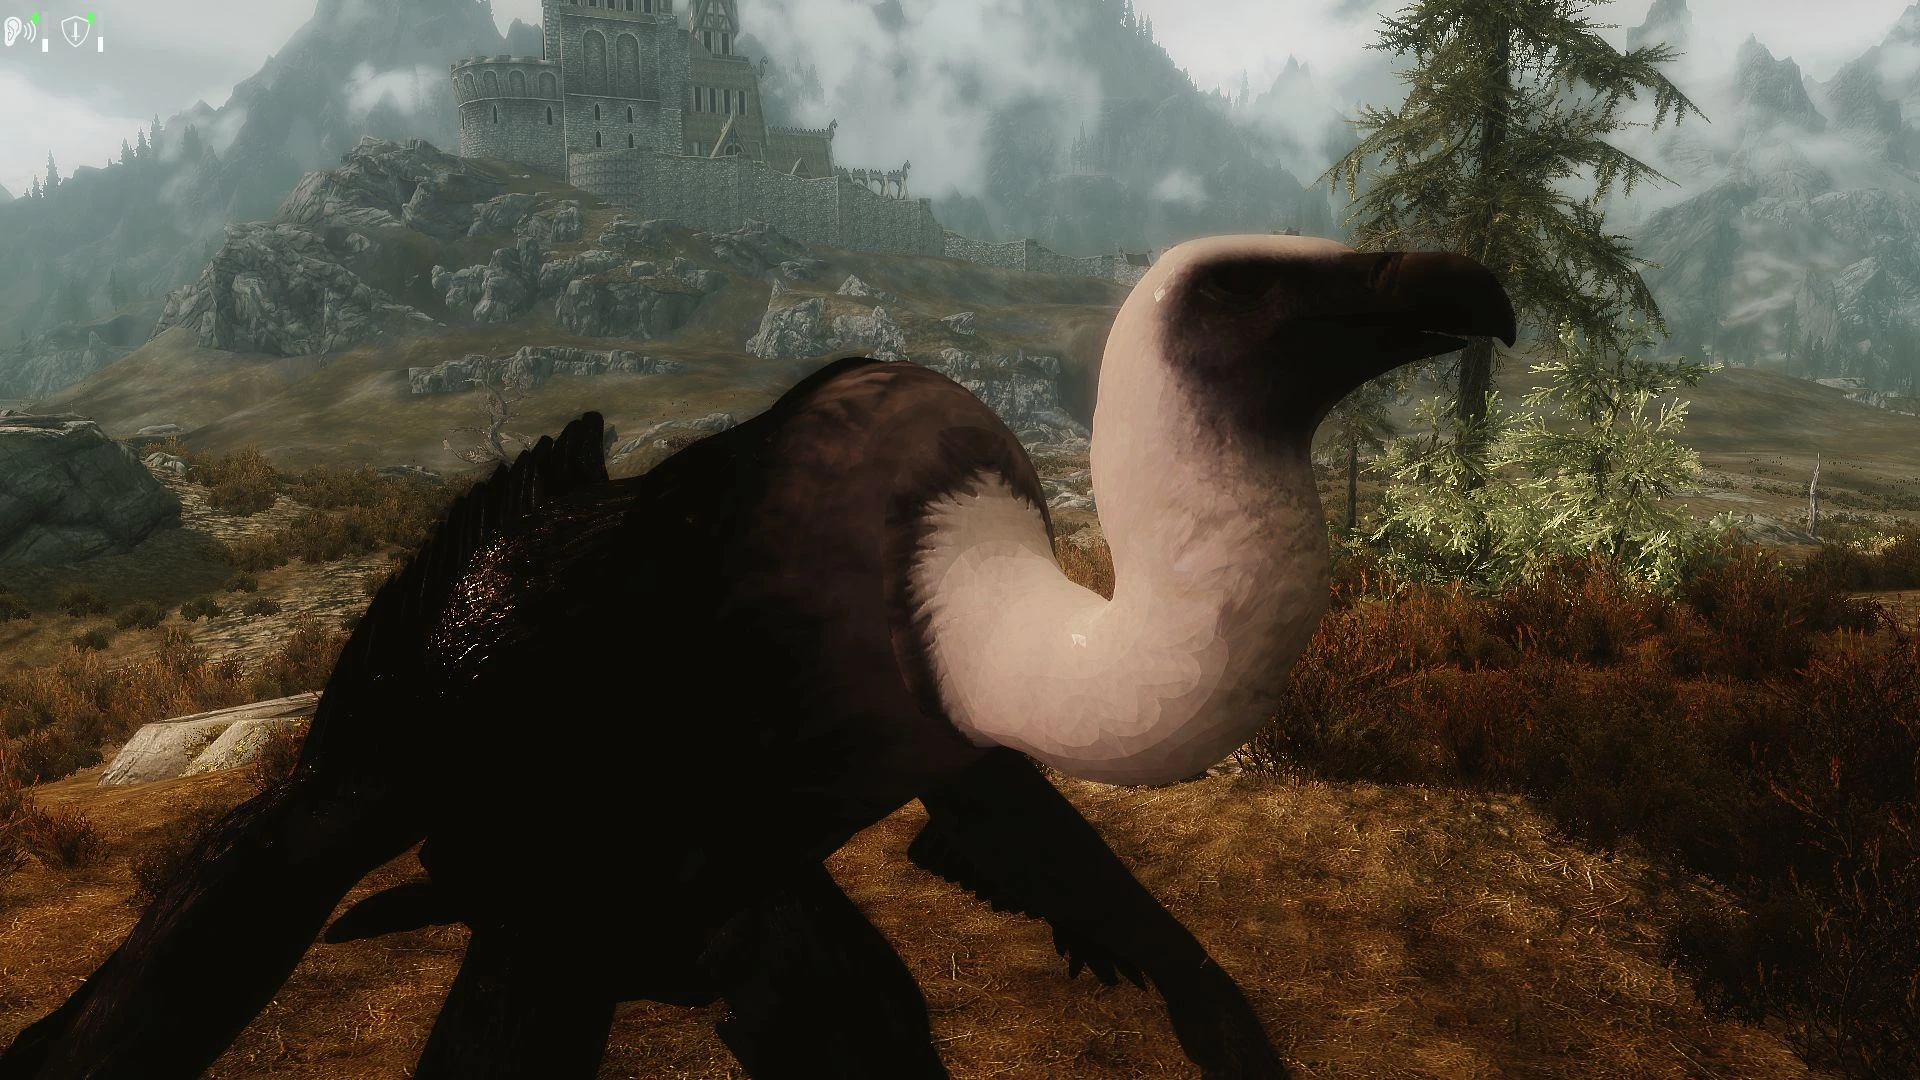 beasts of tamriel sse